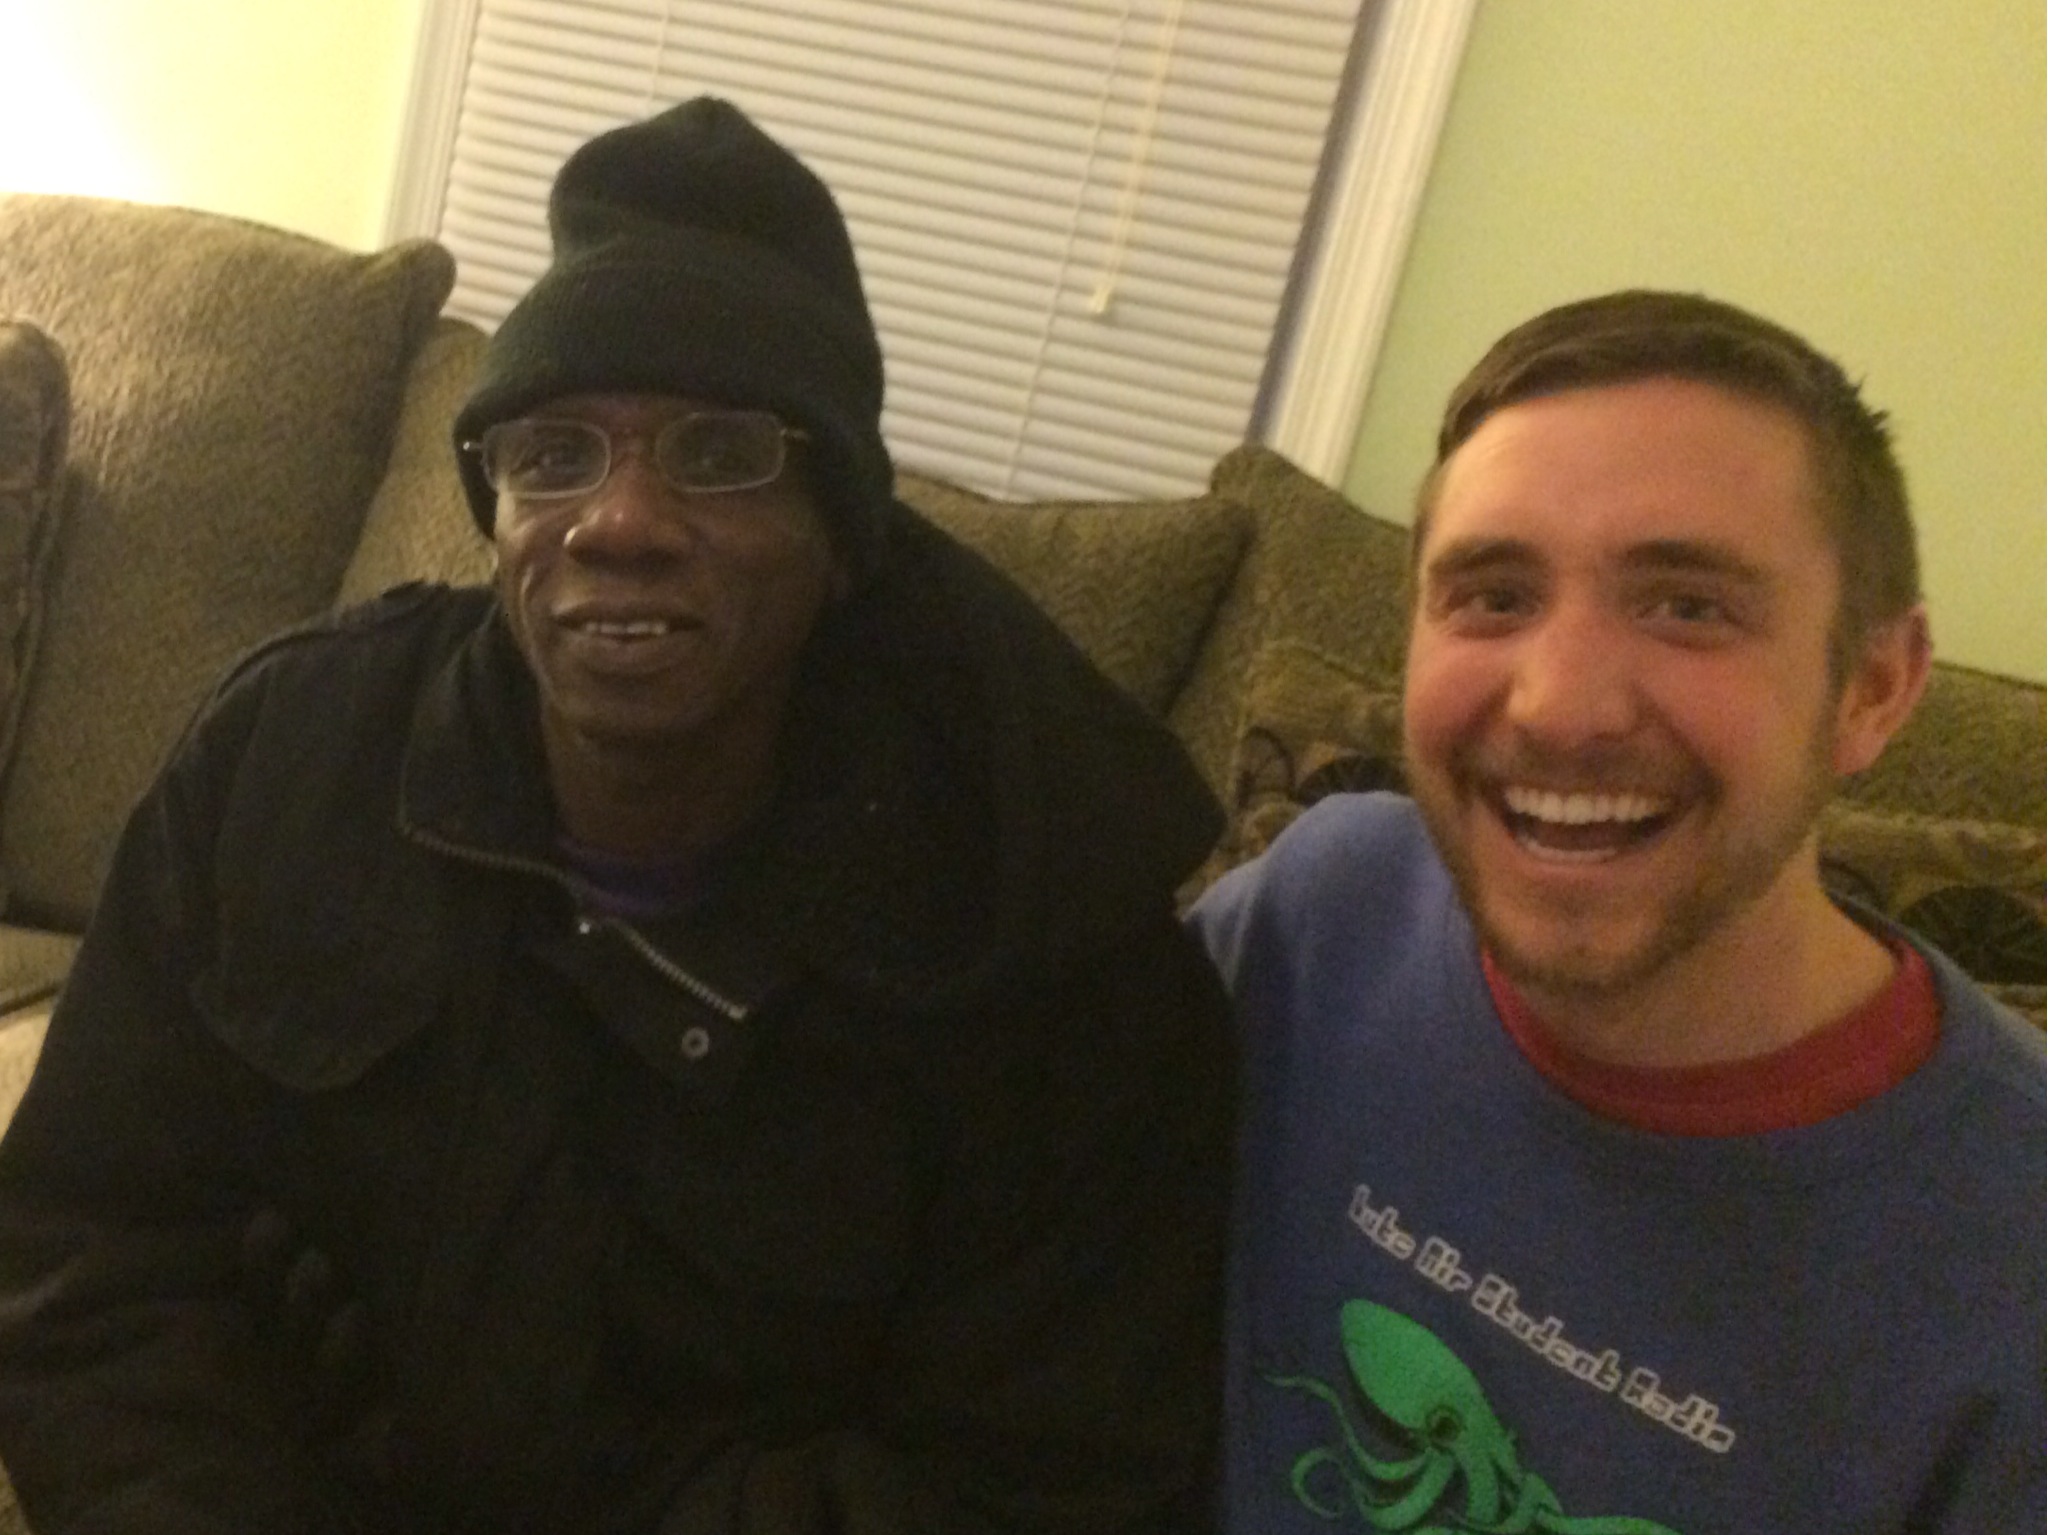 Anthony Markuson, right, jokes around with a resident of the group home in Baltimore where Markuson is working with the Lutheran Volunteer Corps before returning to Washington for medical school. (Photo: courtesy of Anthony Markuson)